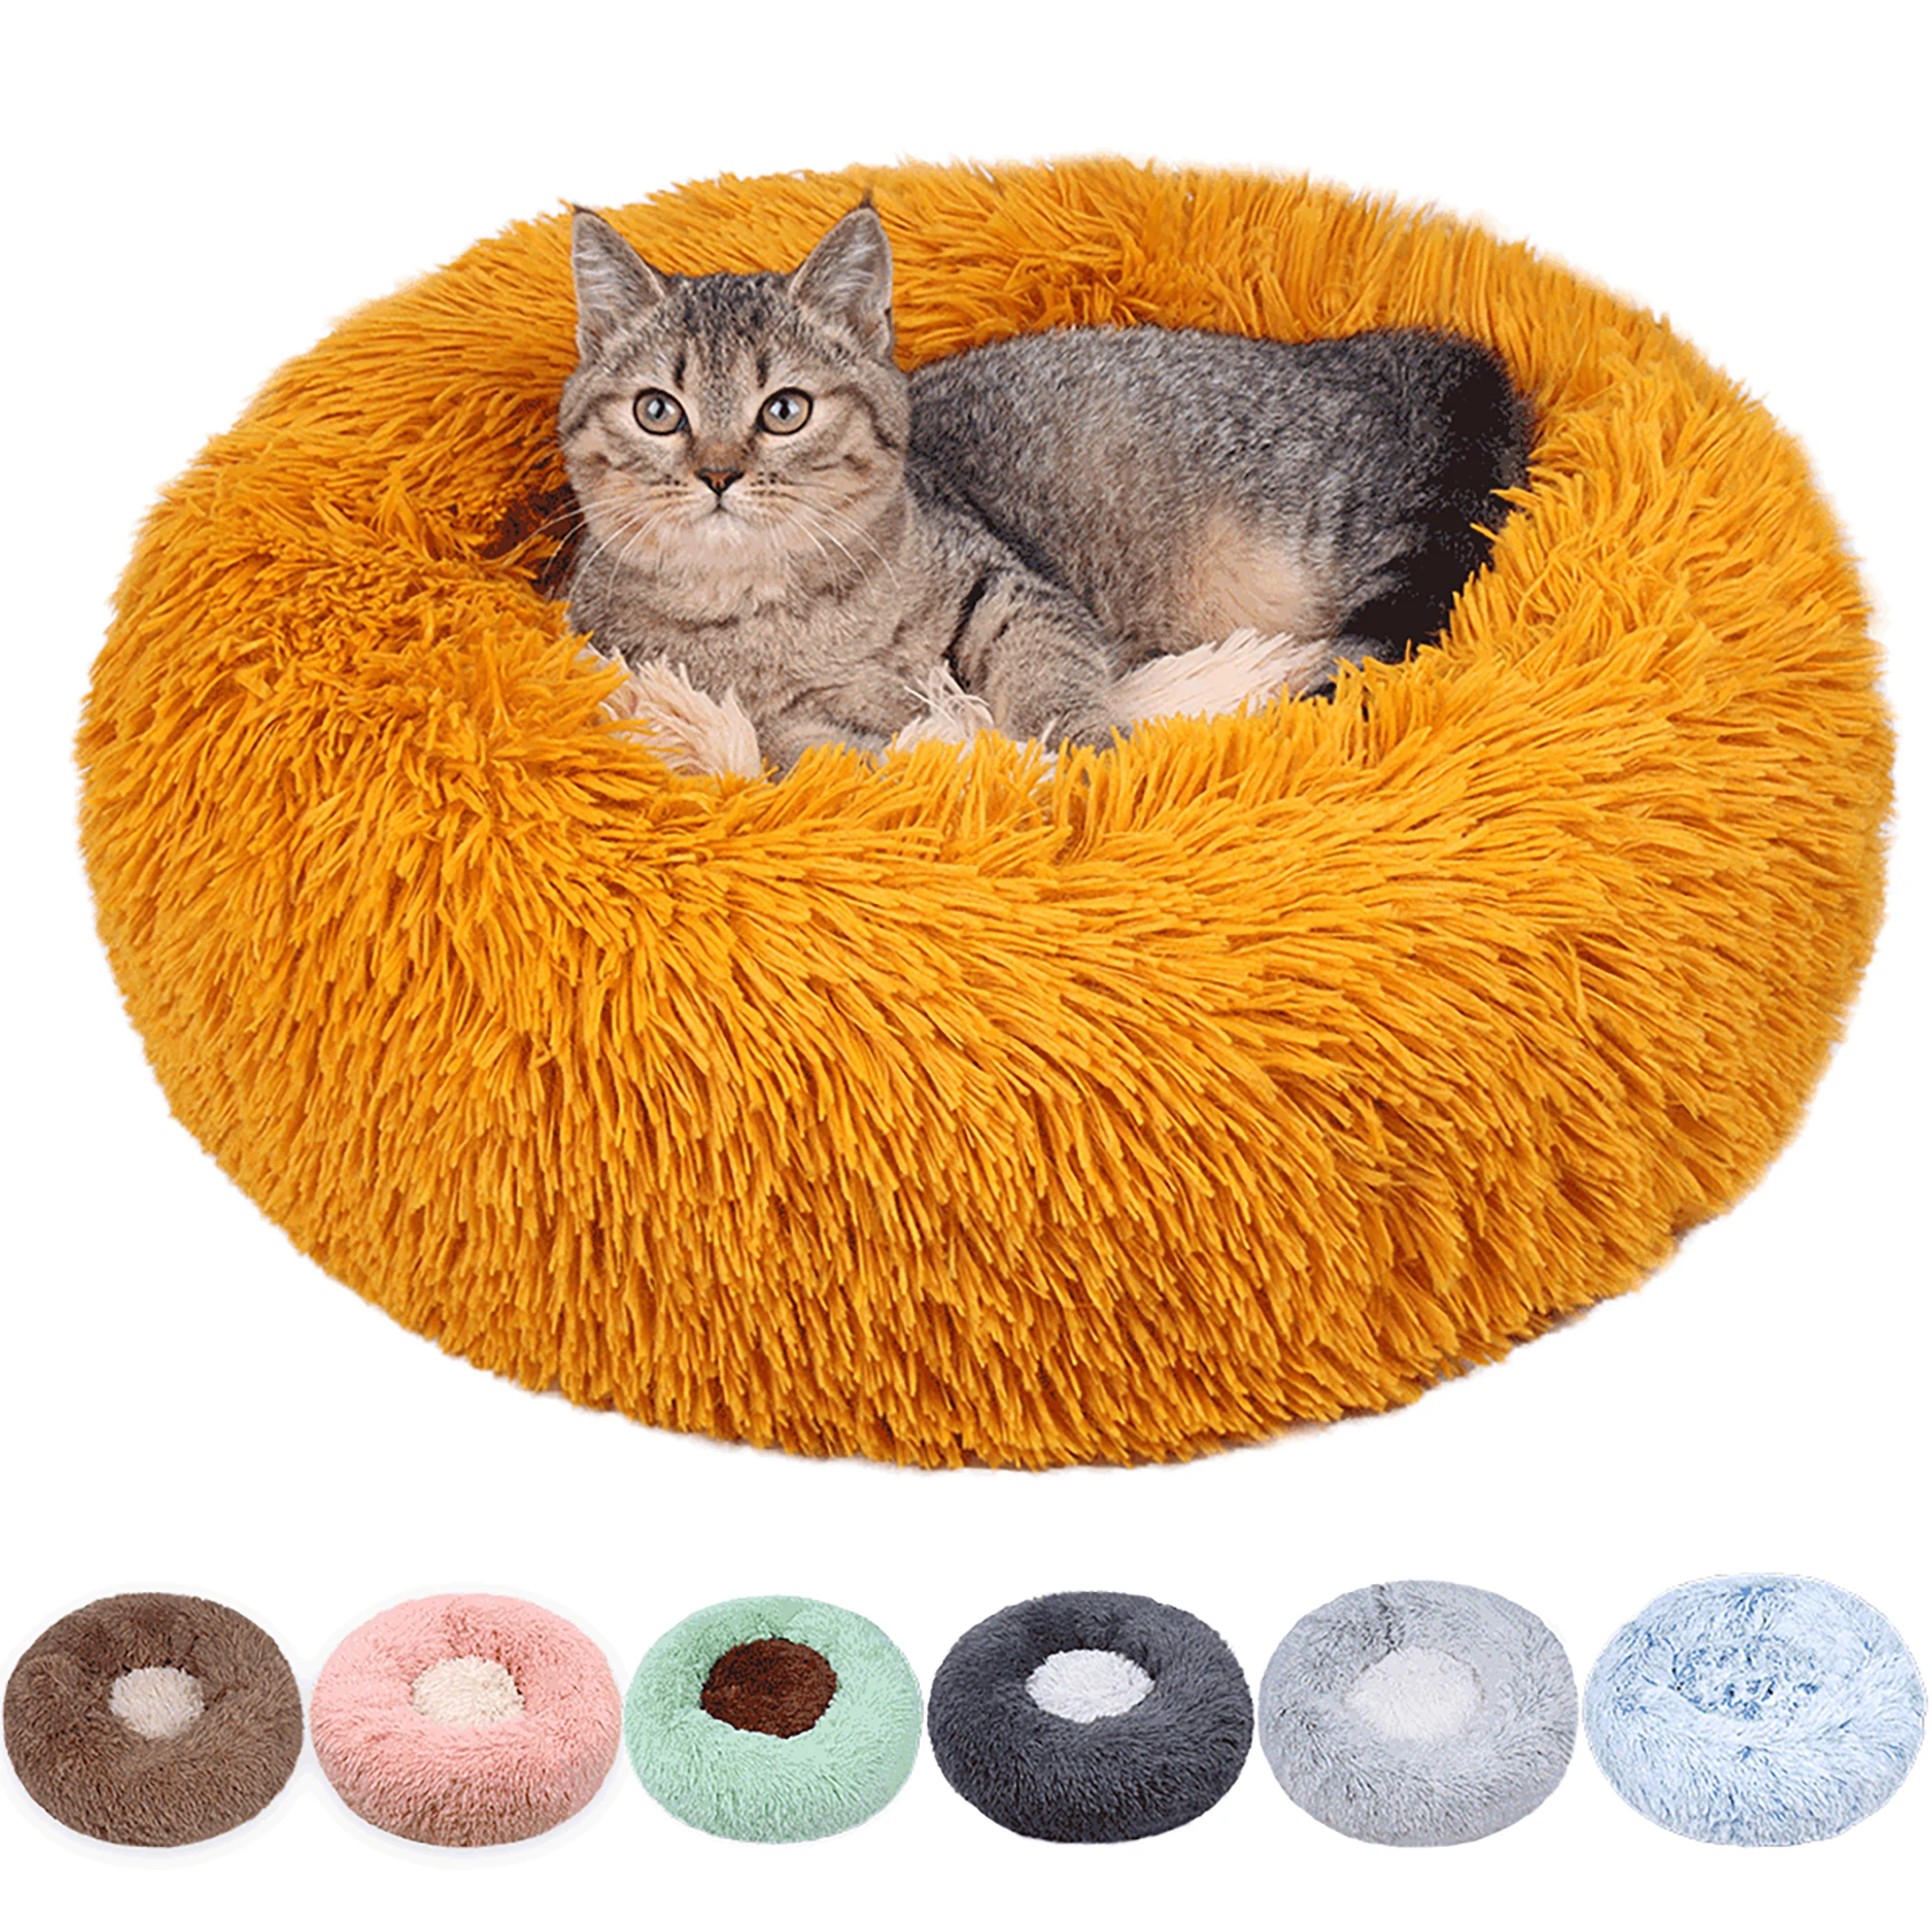 

Wholesale New Style Plush Pet Kennel For Deep Sleep Winter Donuts Warm Cat Kennel Bed, Picture shows